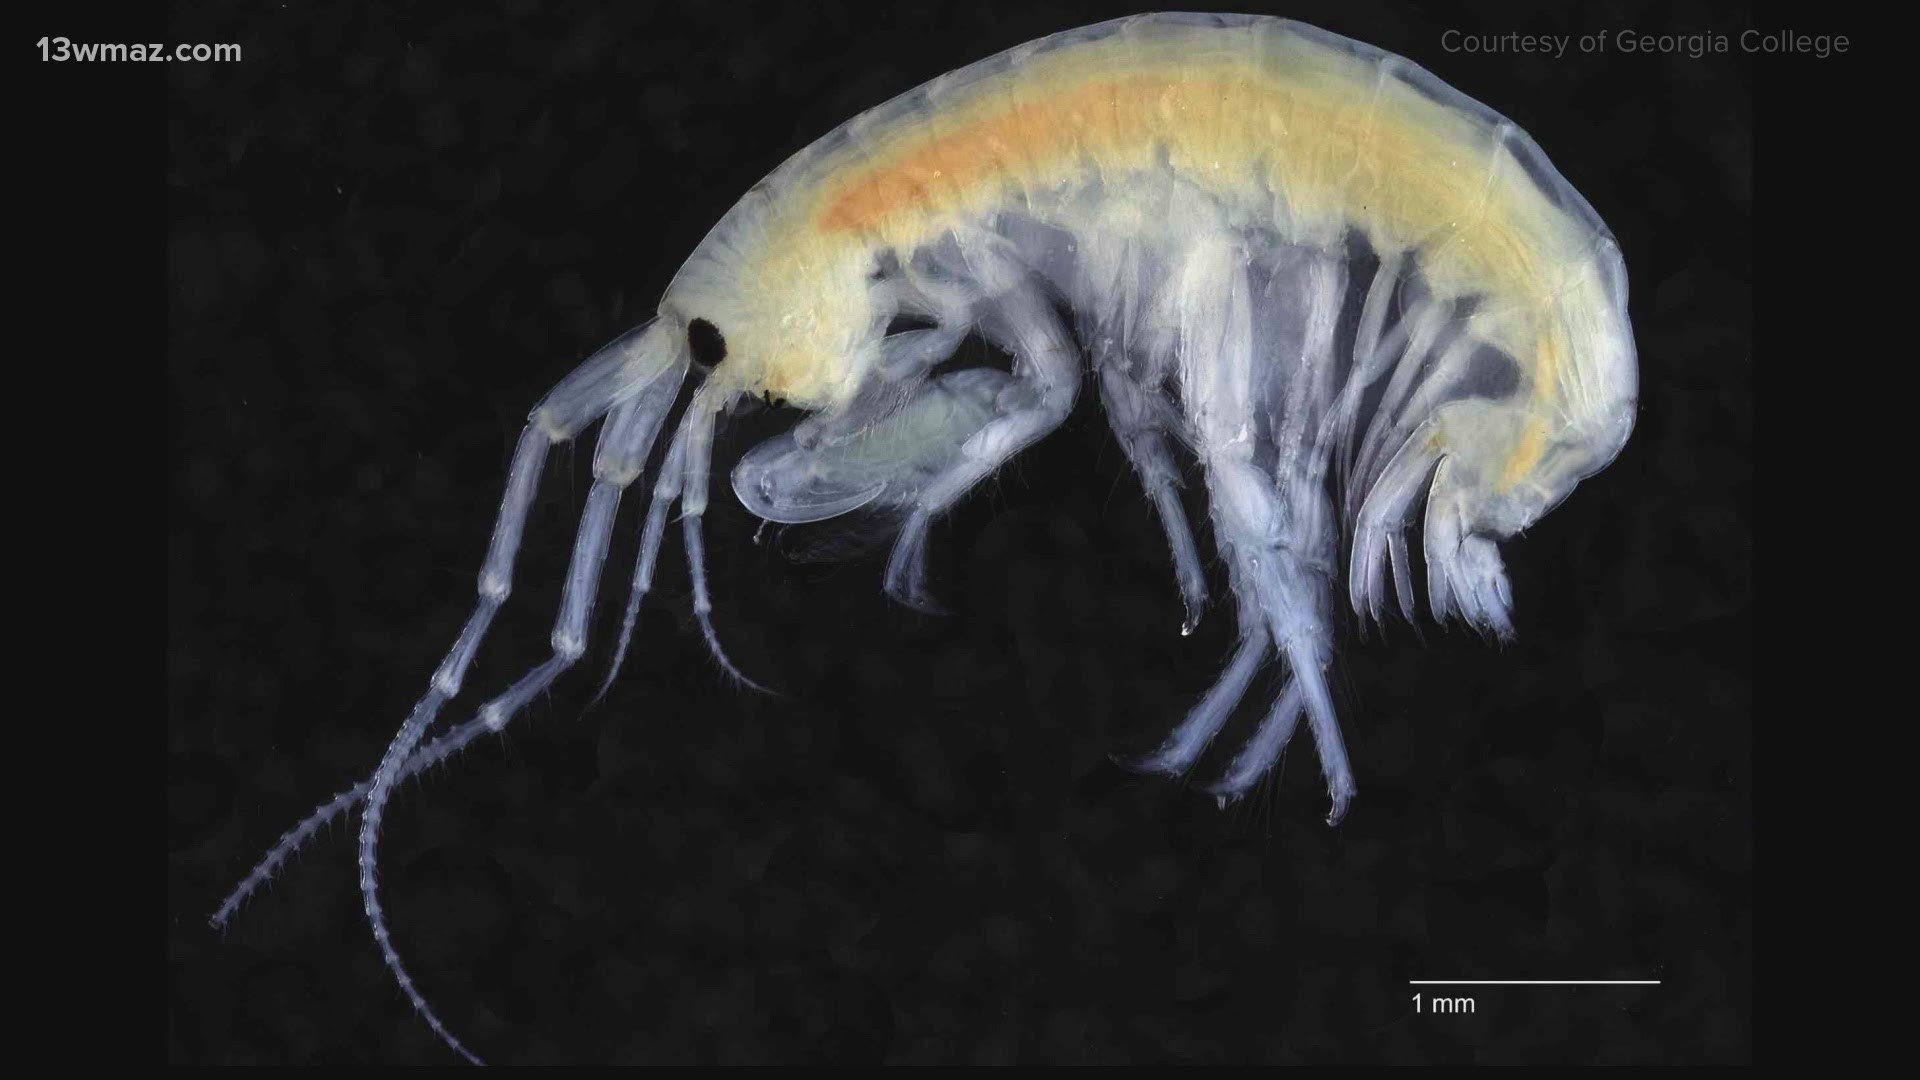 After months of research, a Georgia College professor and student discovered a new species of shrimplike-amphipod